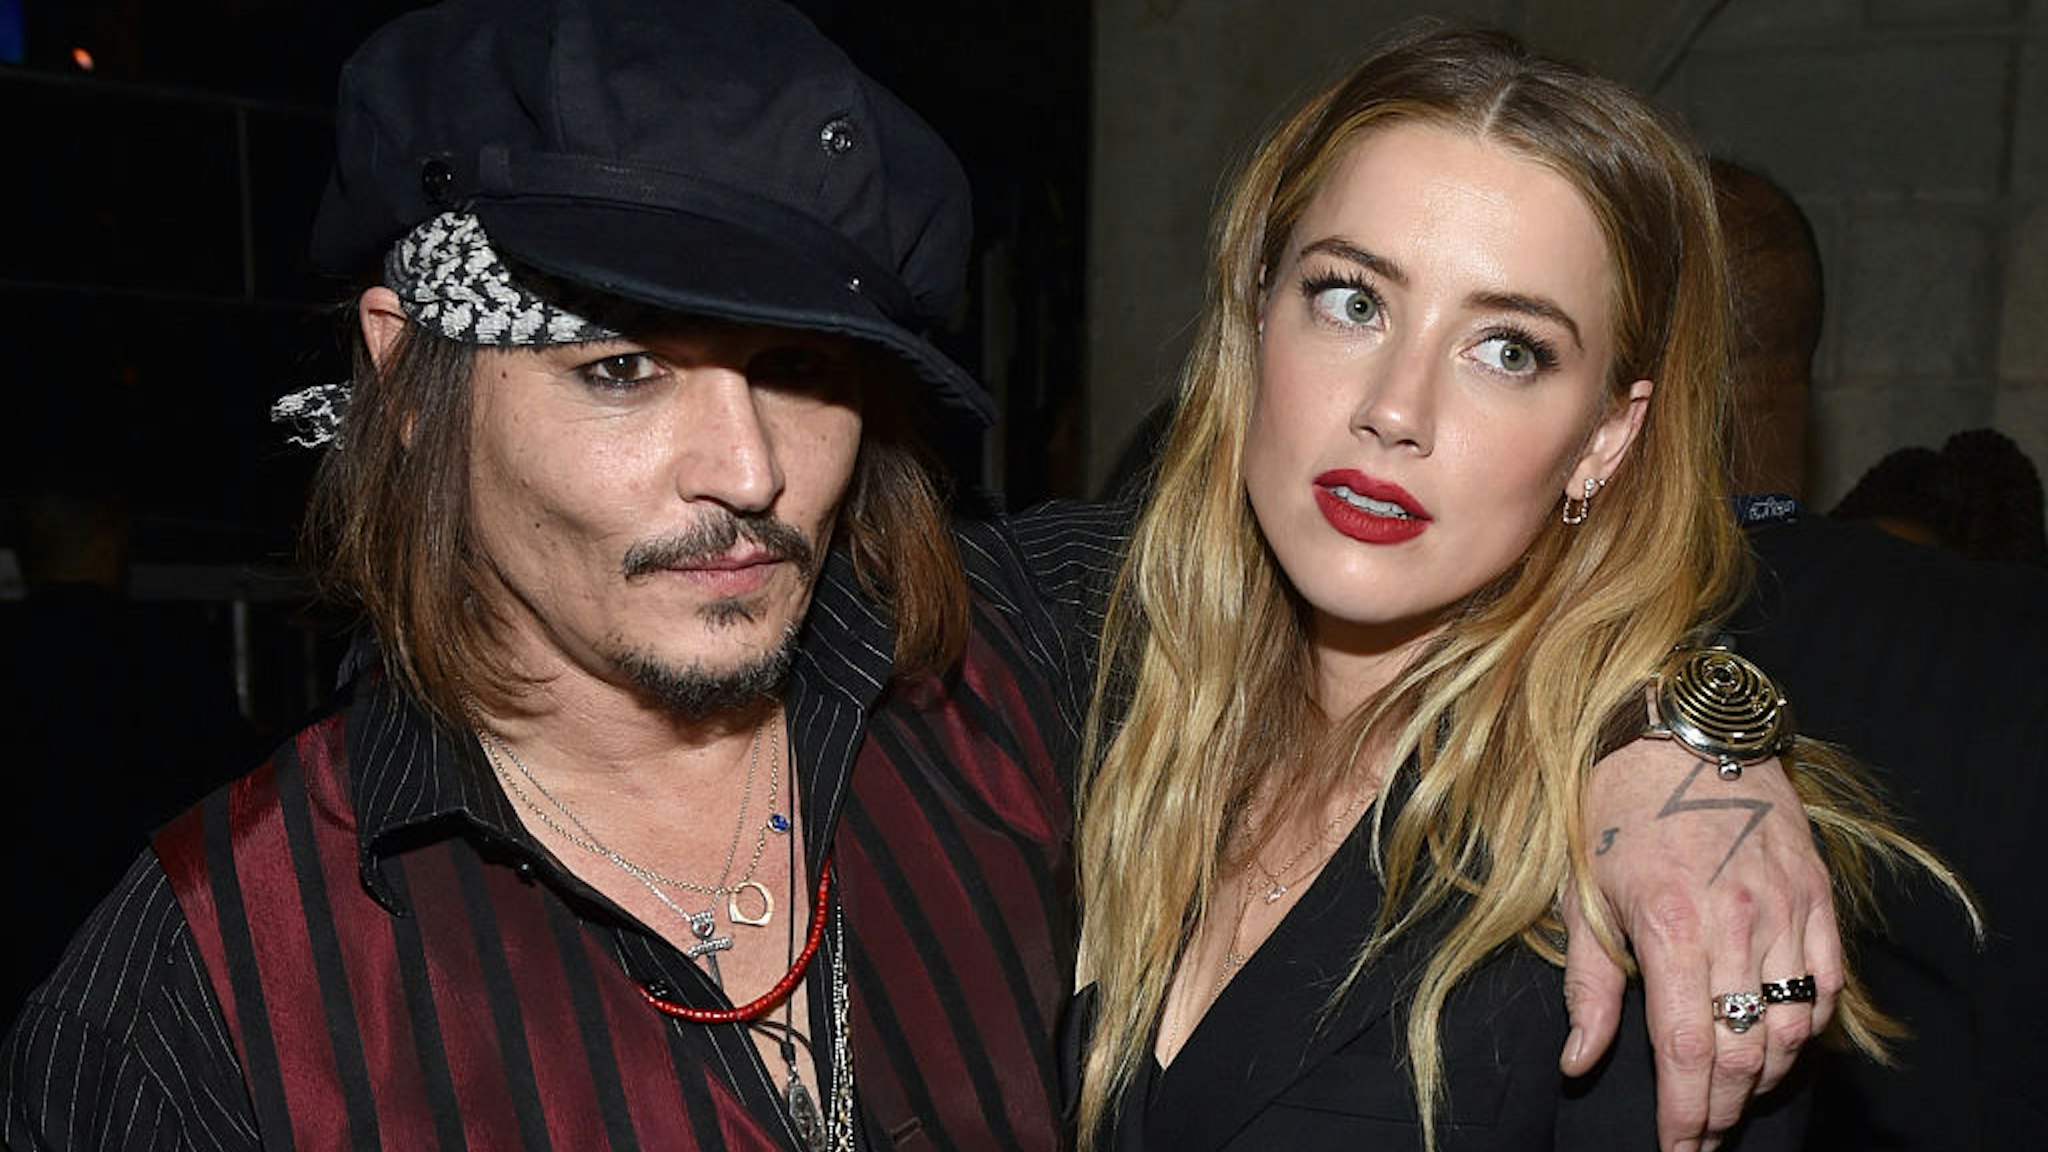 Actor/musician Johnny Depp (L) and actress Amber Heard attend The 58th GRAMMY Awards at Staples Center on February 15, 2016 in Los Angeles, California.